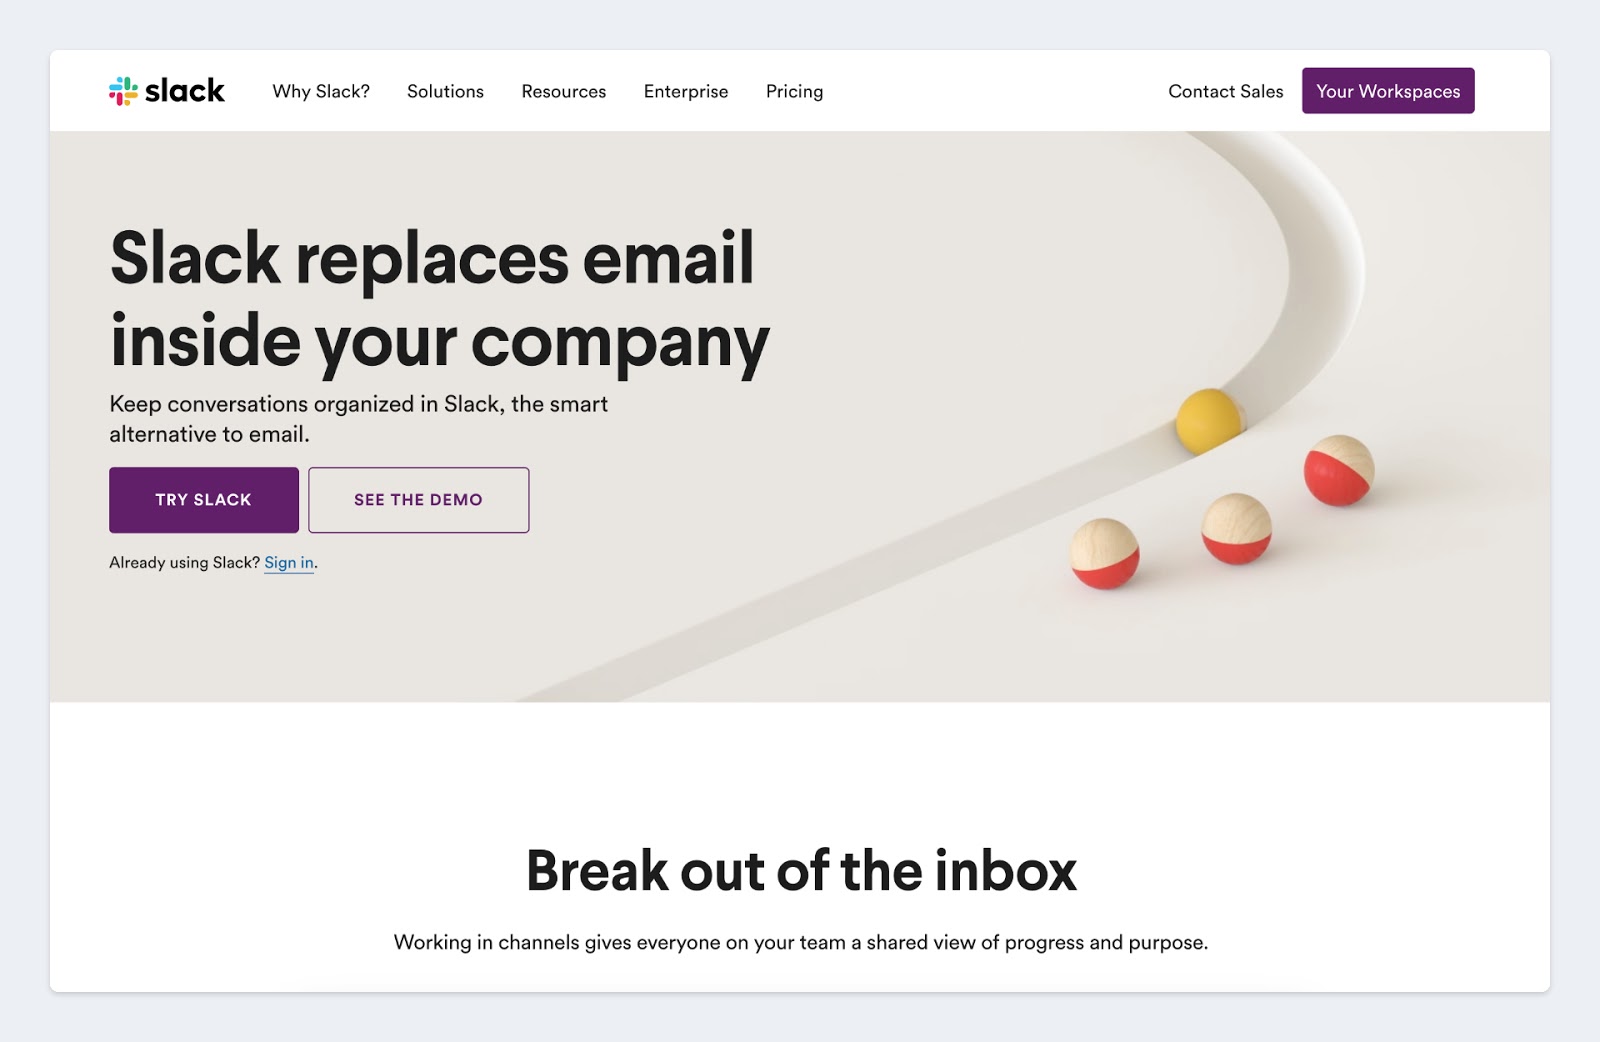 Screenshot of Slack's homepage and the typeface treatment used to call attention to the CTA.